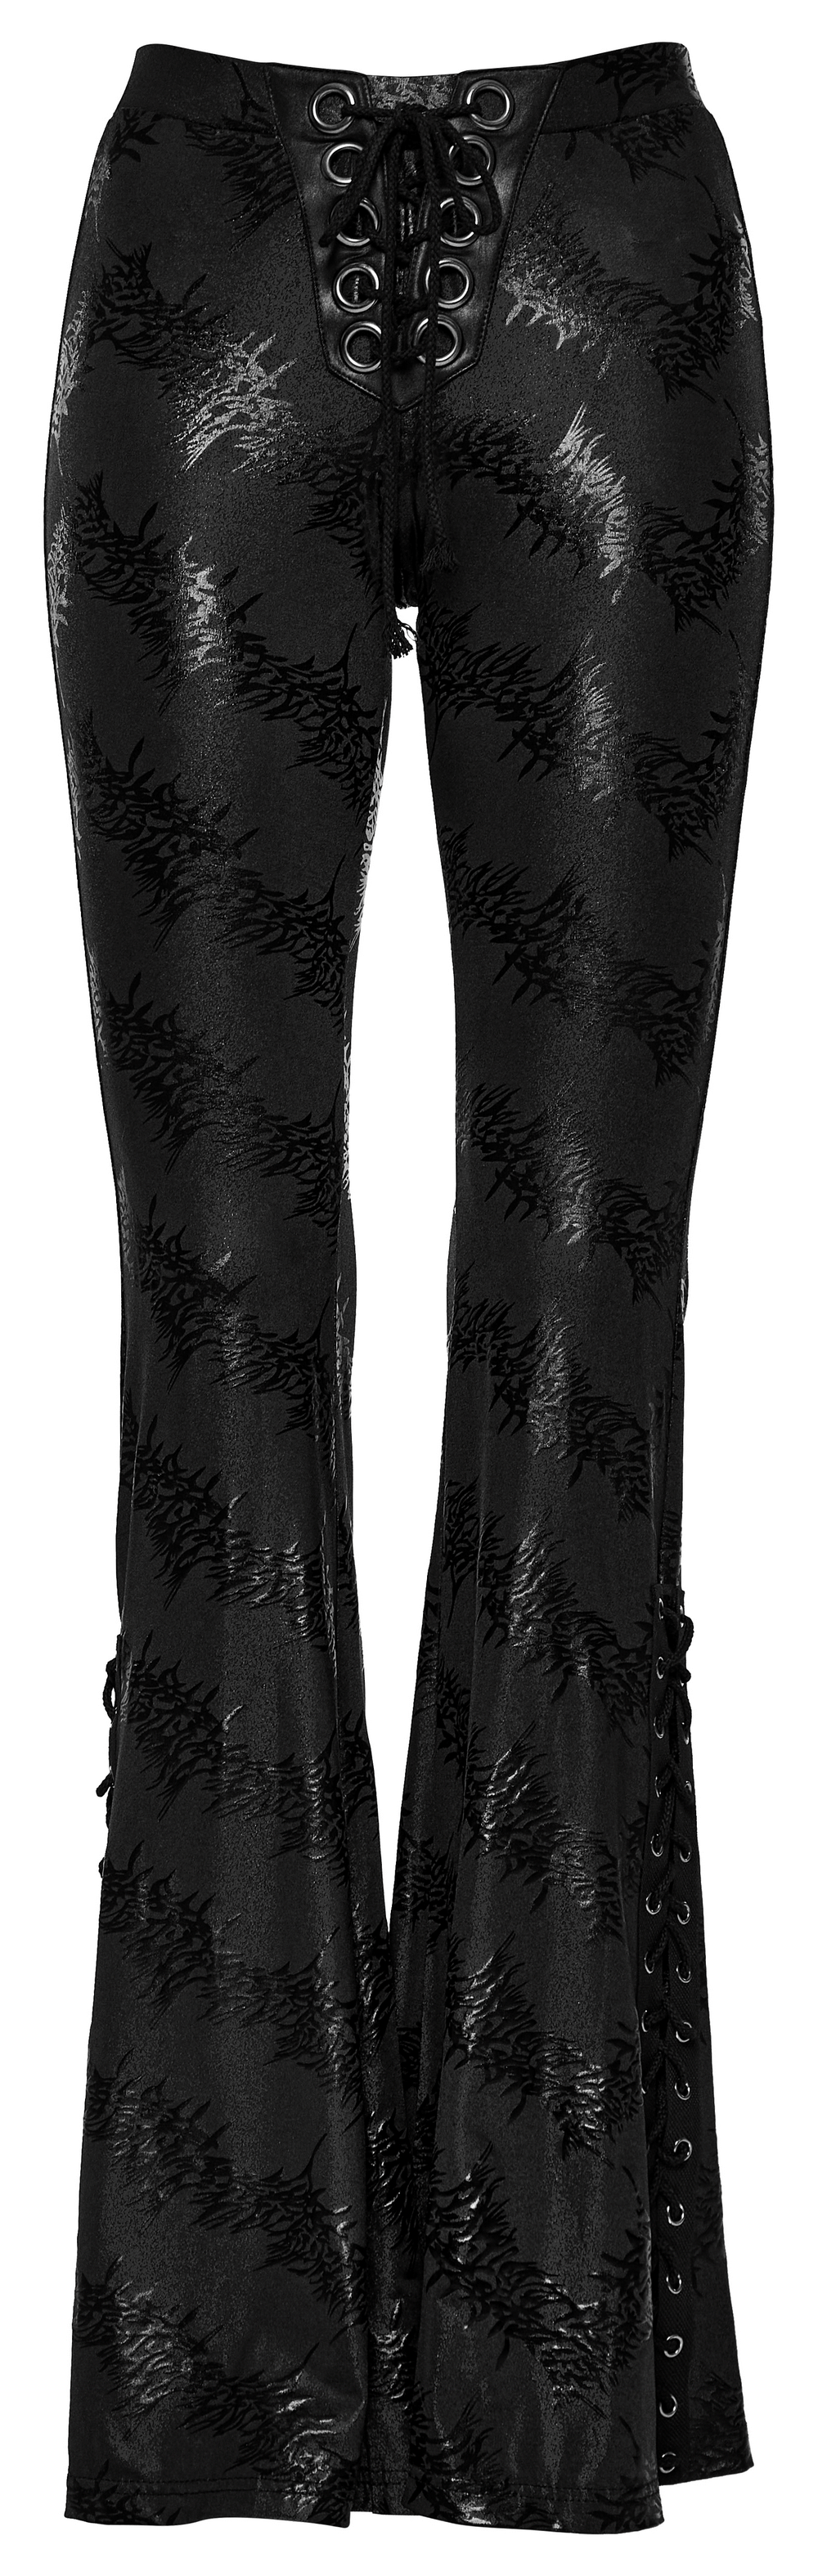 Stylish Lace-Up Flared Pants with Sparkling Tree Texture